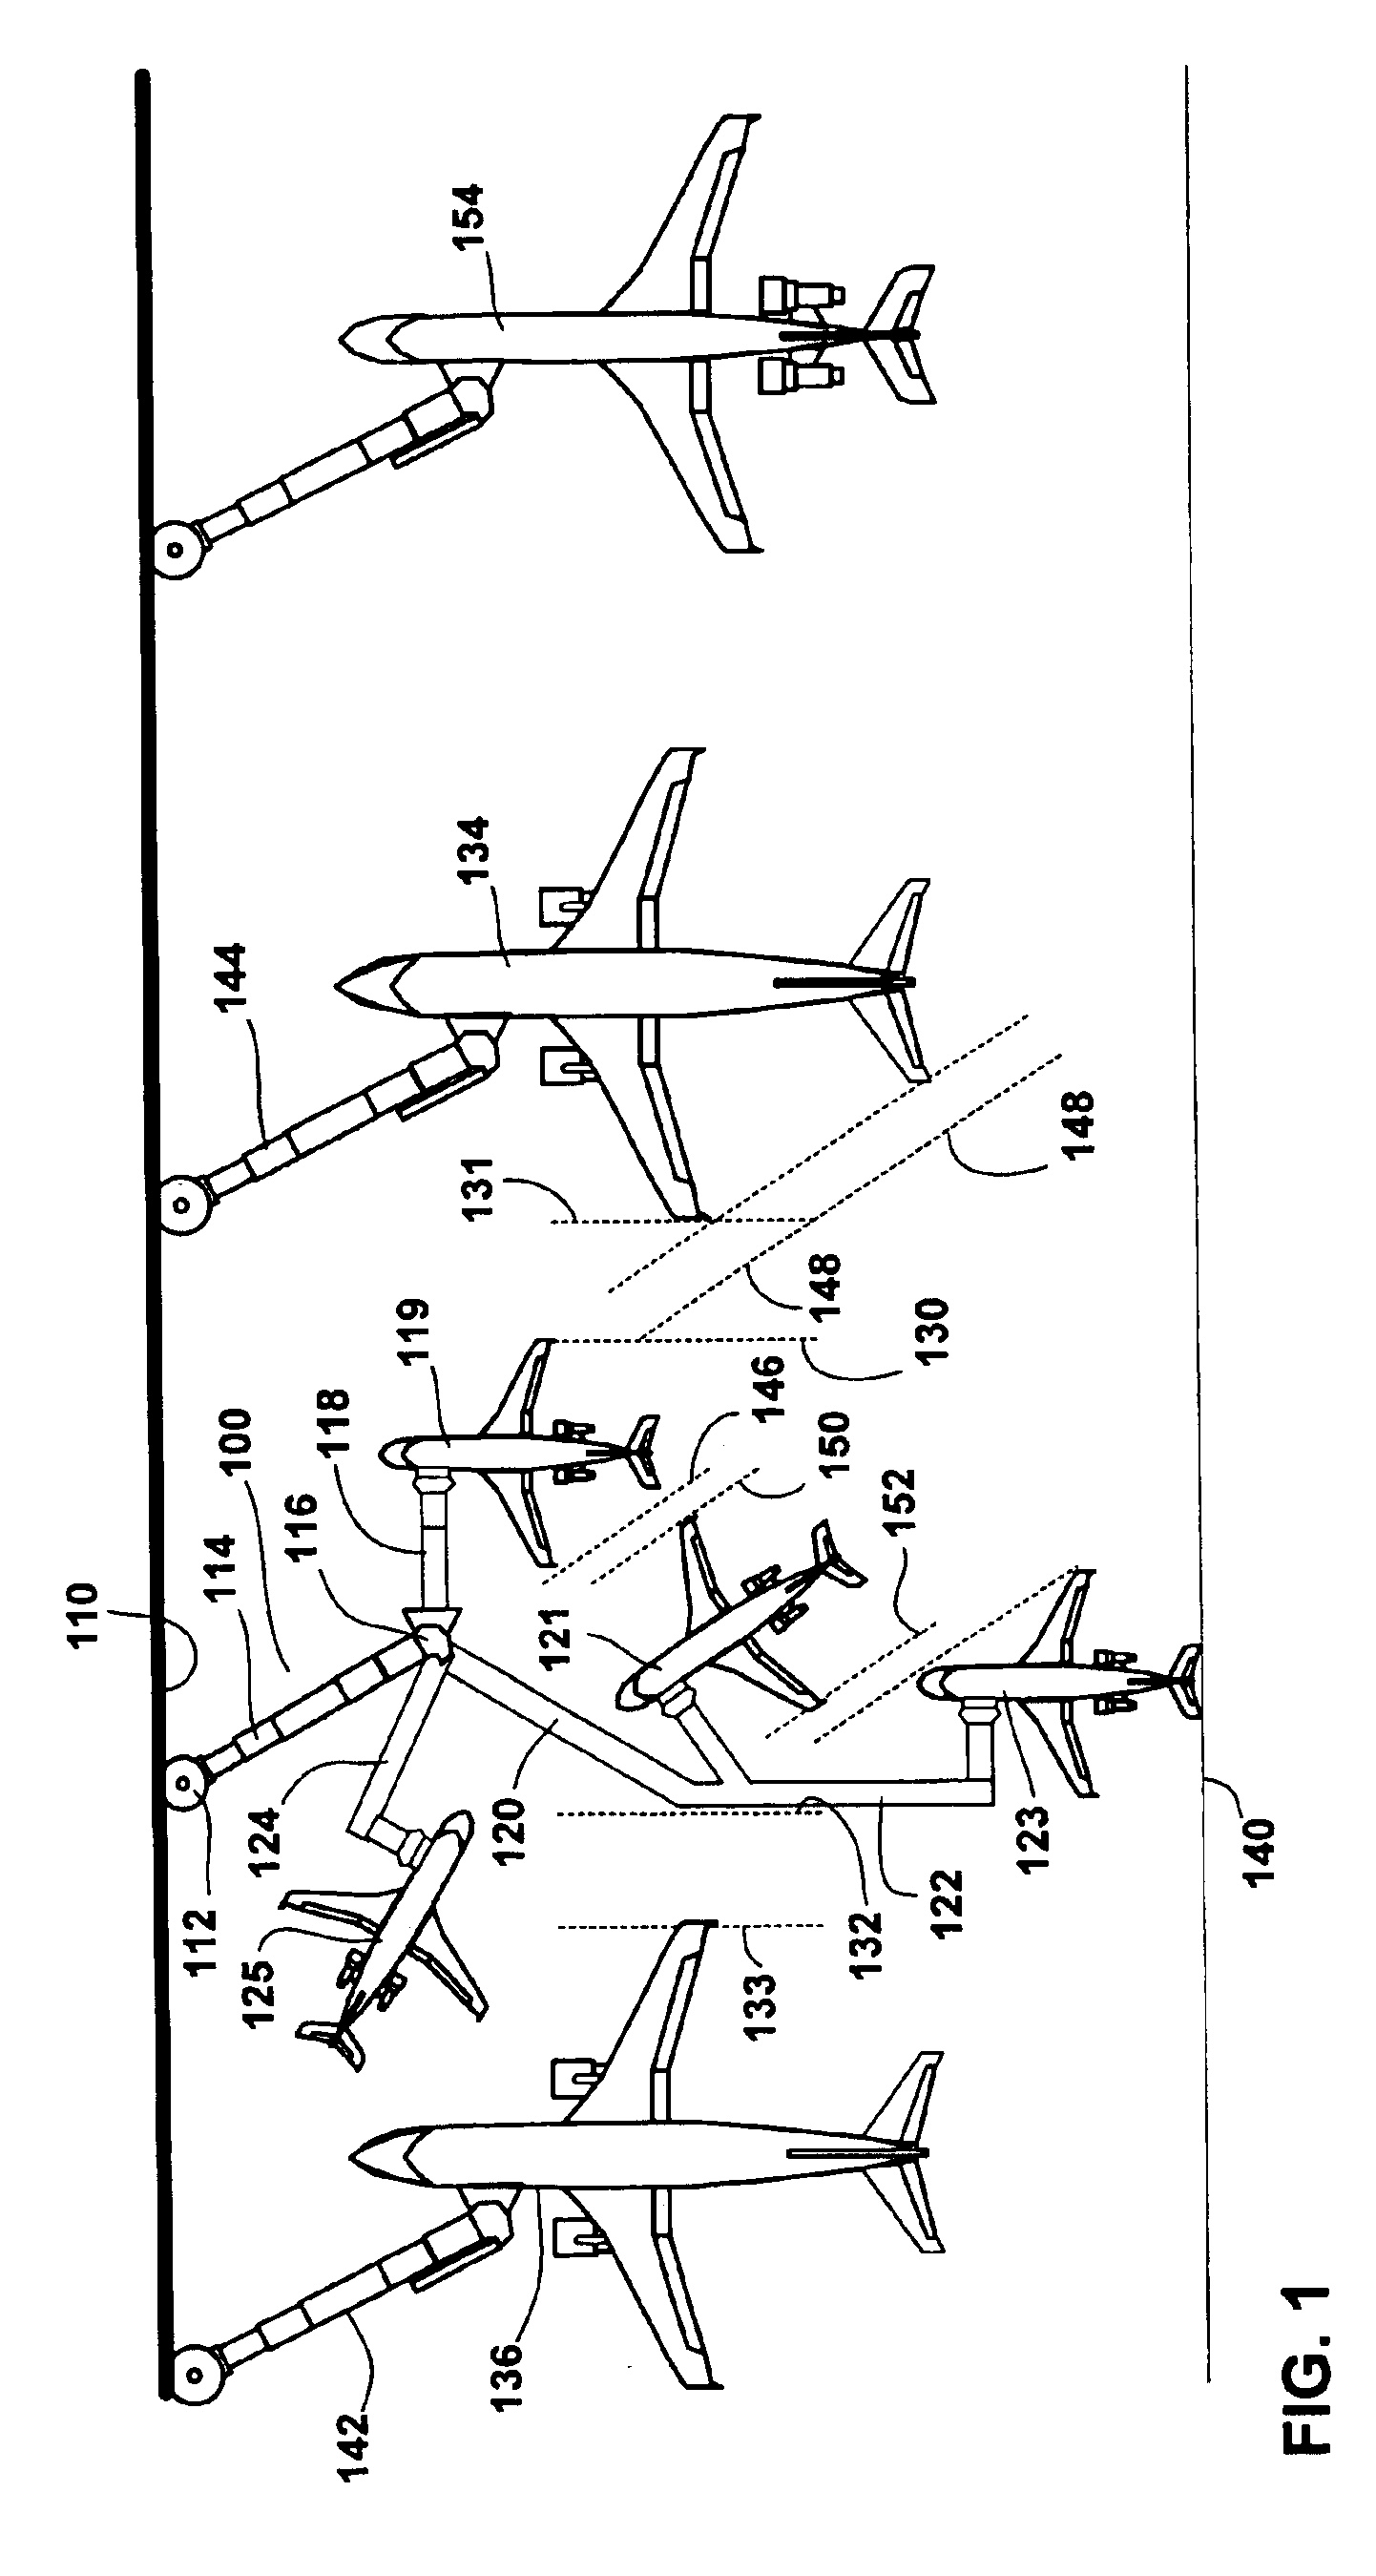 Interstitial regional aircraft boarding piers, and methods of using same